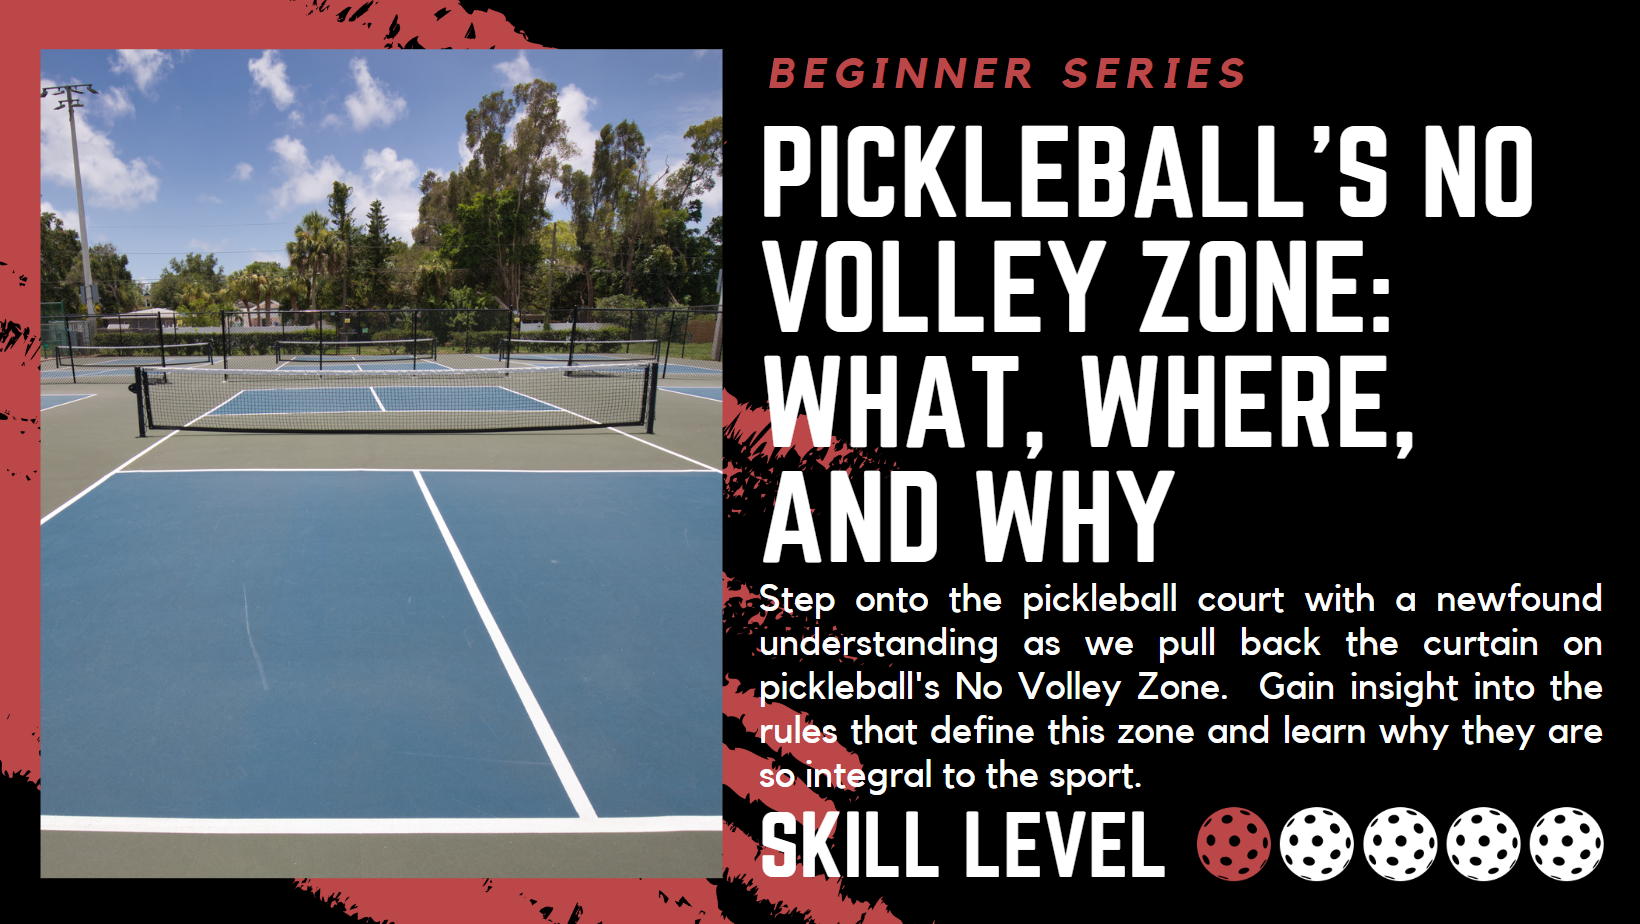 Pickleball’s No Volley Zone: What, Where, and Why​. Step onto the pickleball court with a newfound understanding as we pull back the curtain on pickleball's No Volley Zone. Gain insight into the rules that define this zone and learn why they are so integral to the sport. Skill level 1 of 5